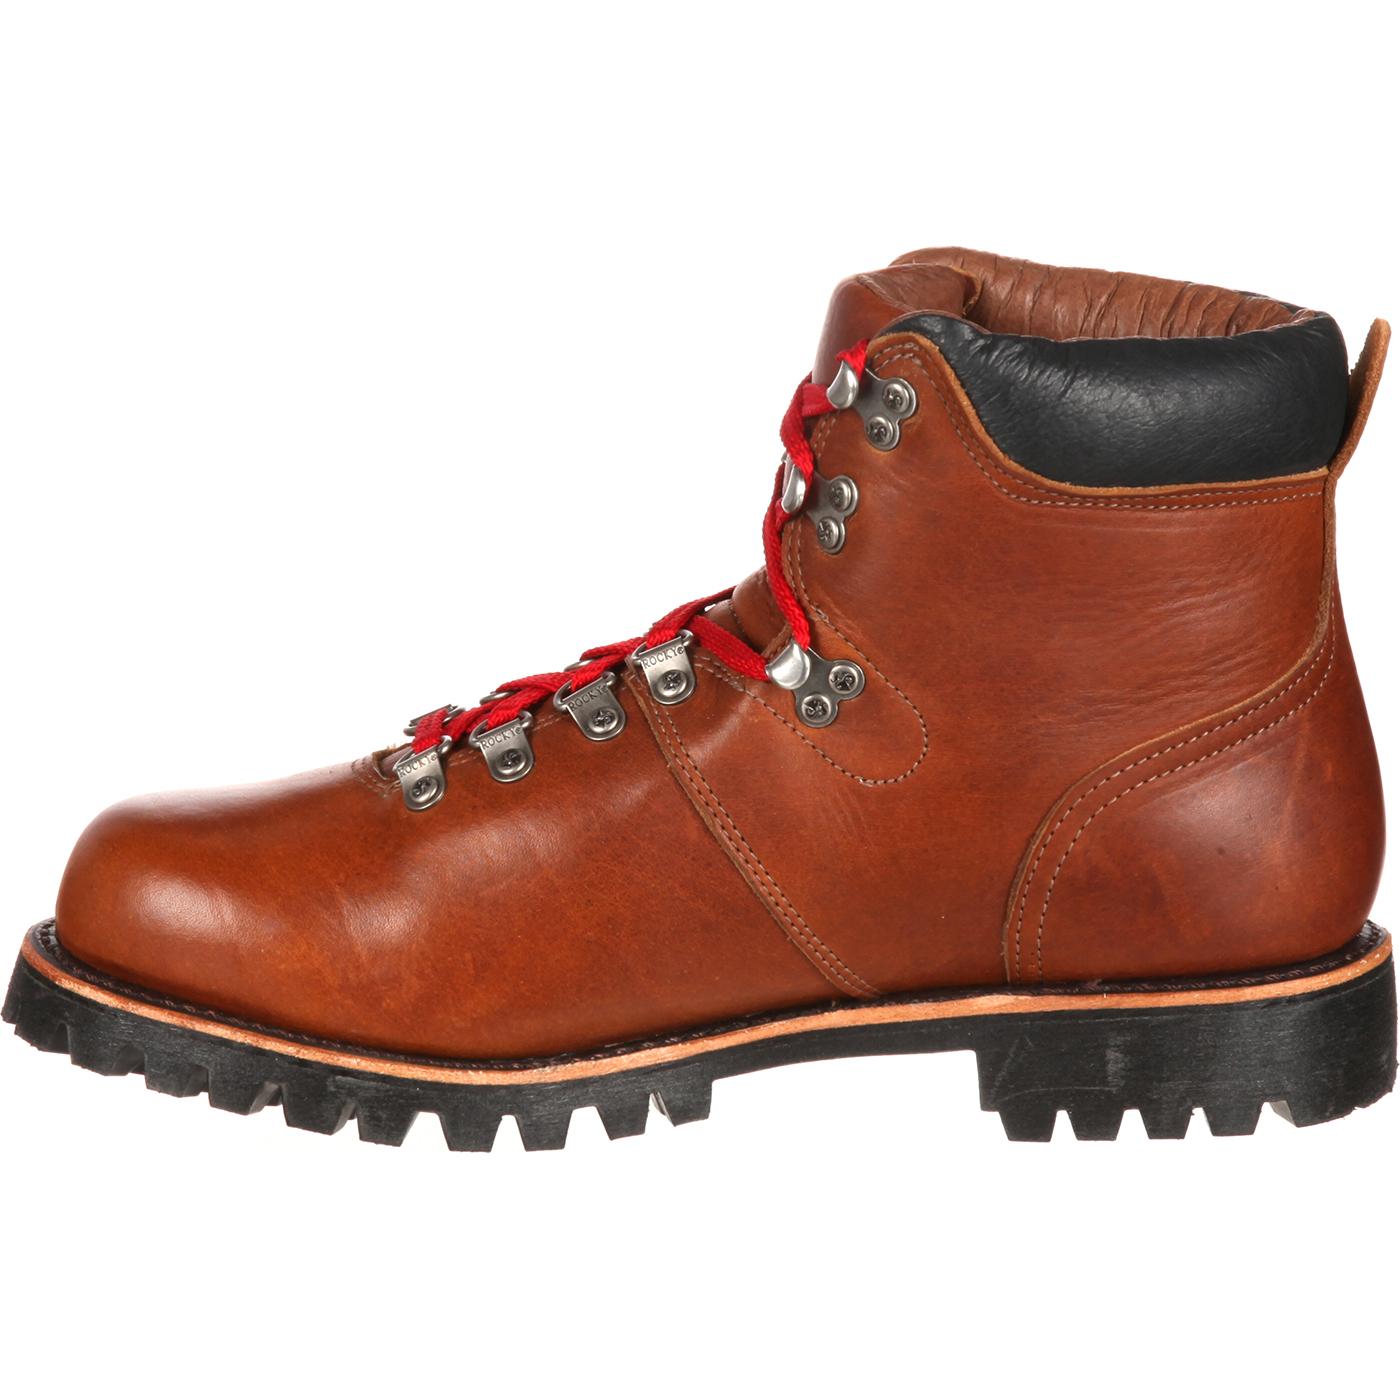 Rocky Original Throwback Hiker made in the USA, RKS0221